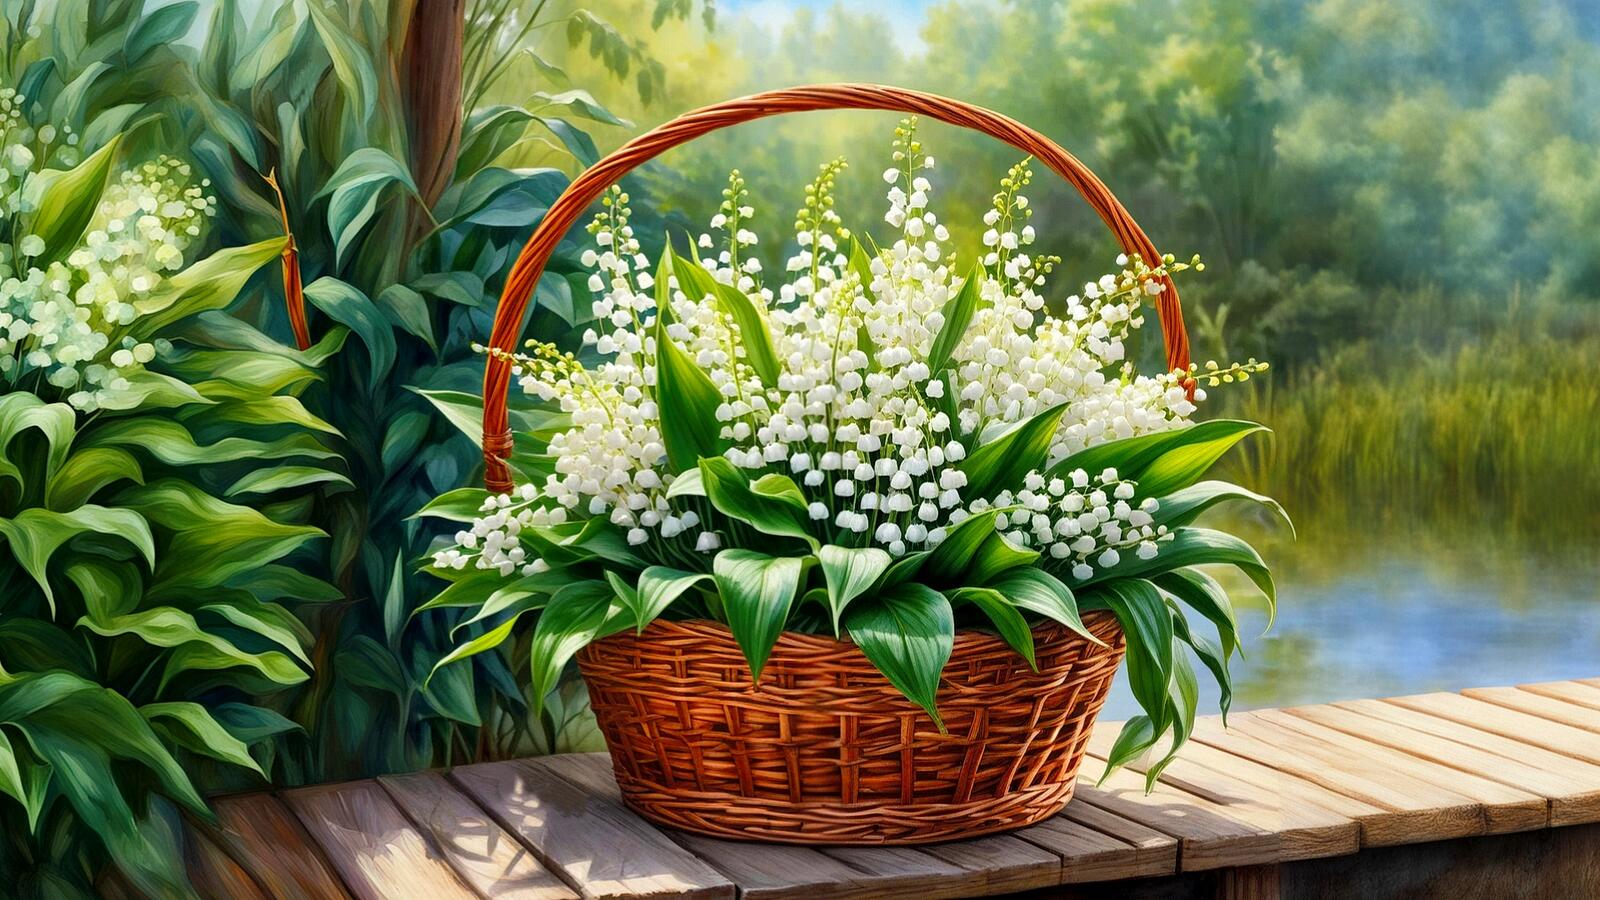 Free photo A basket of lilies of the valley stands in nature